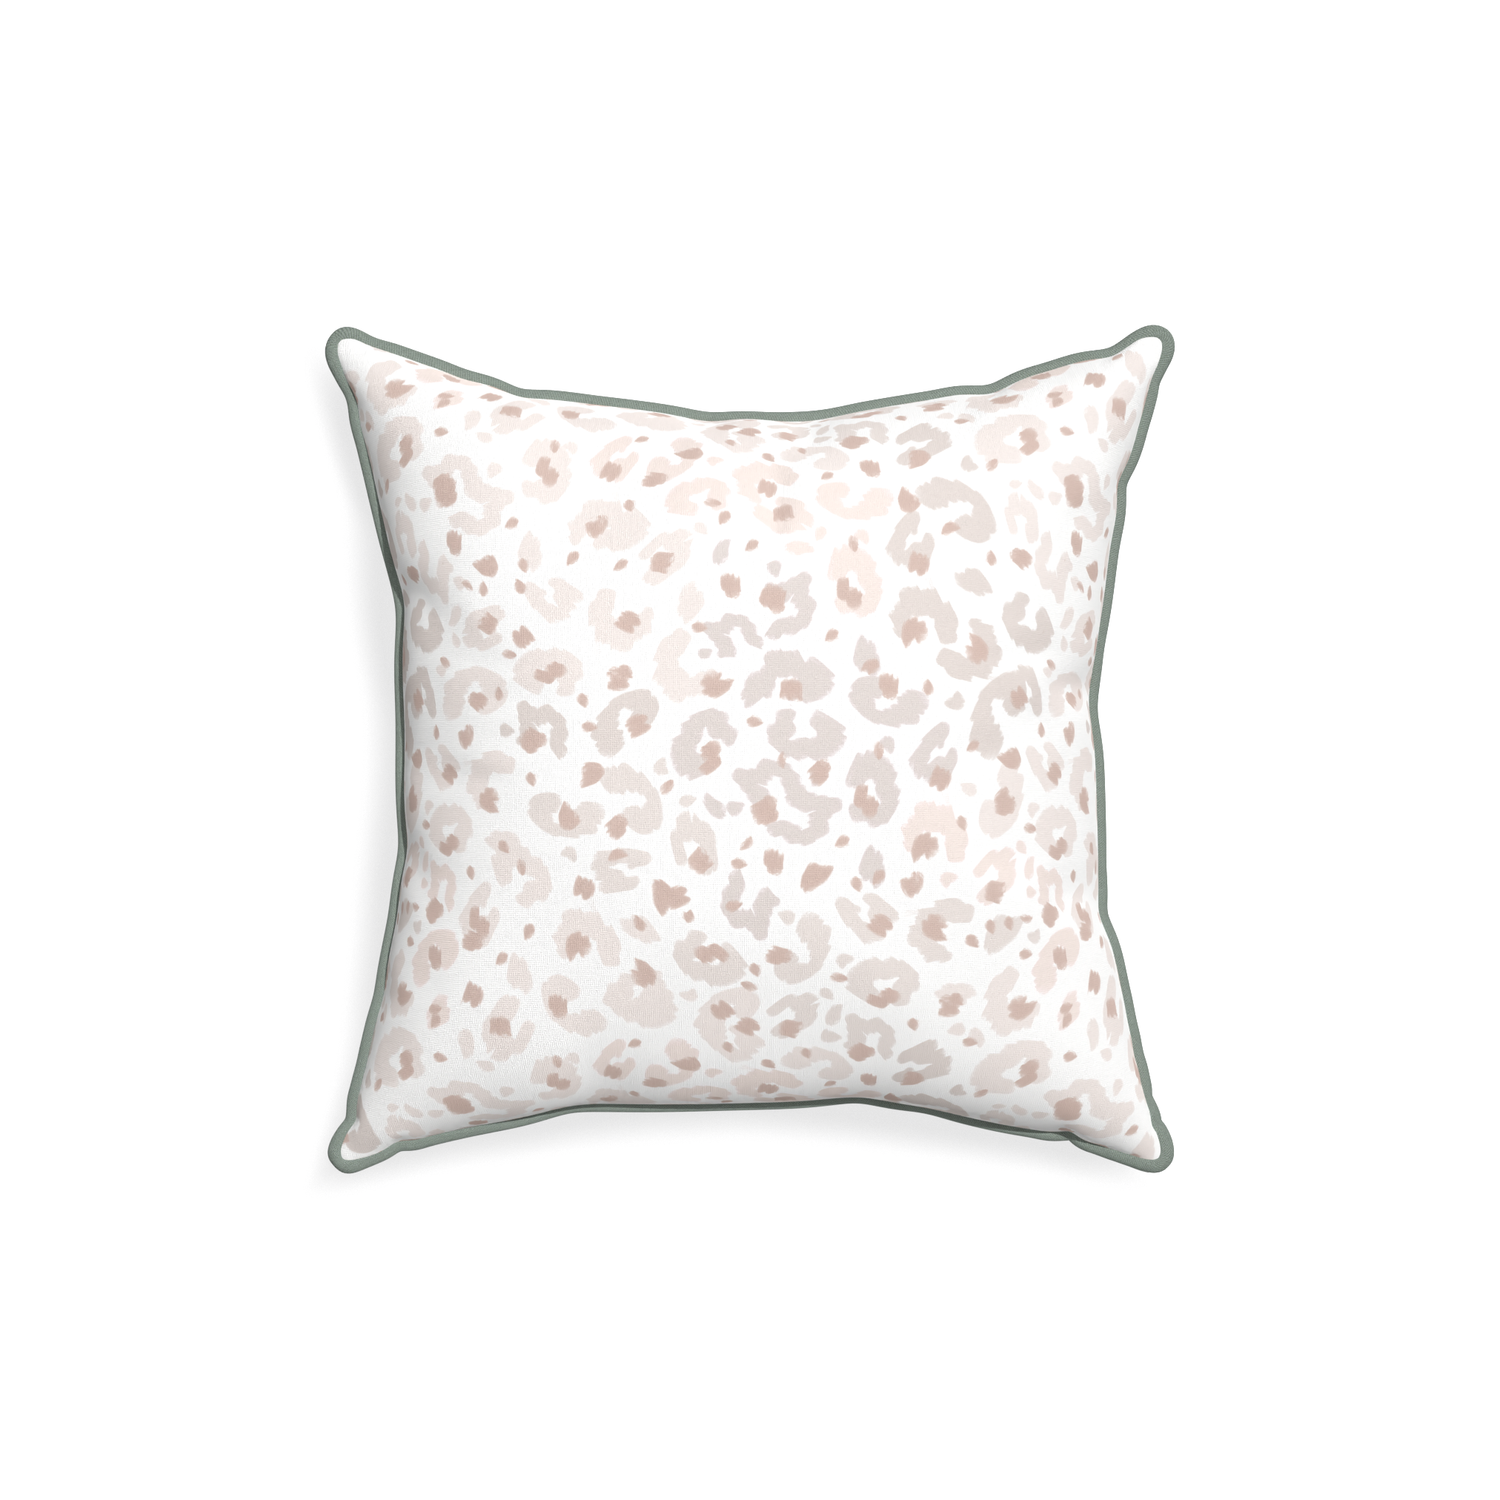 18-square rosie custom beige animal printpillow with sage piping on white background